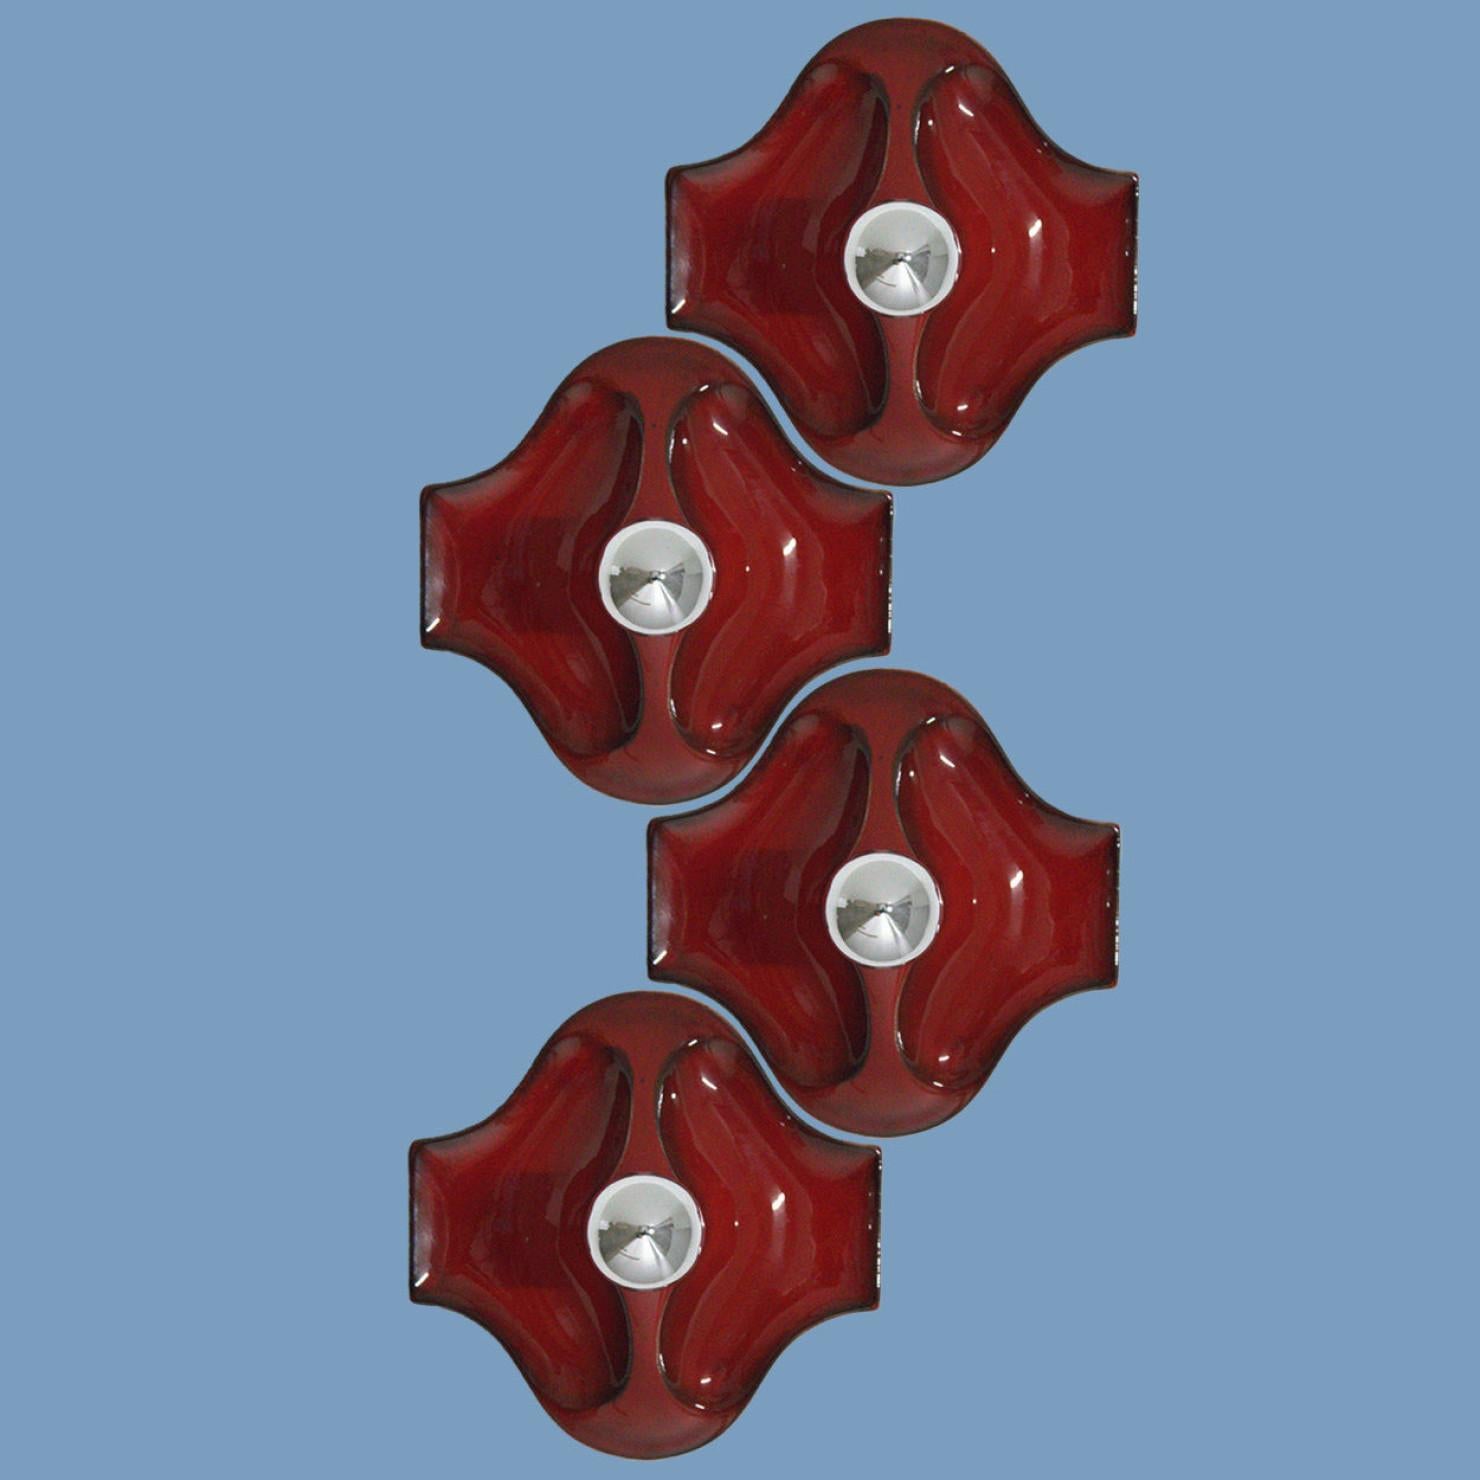 Mid-Century Modern Red Ceramic Wall Lights by Hustadt Keramik, Germany, 1970 For Sale